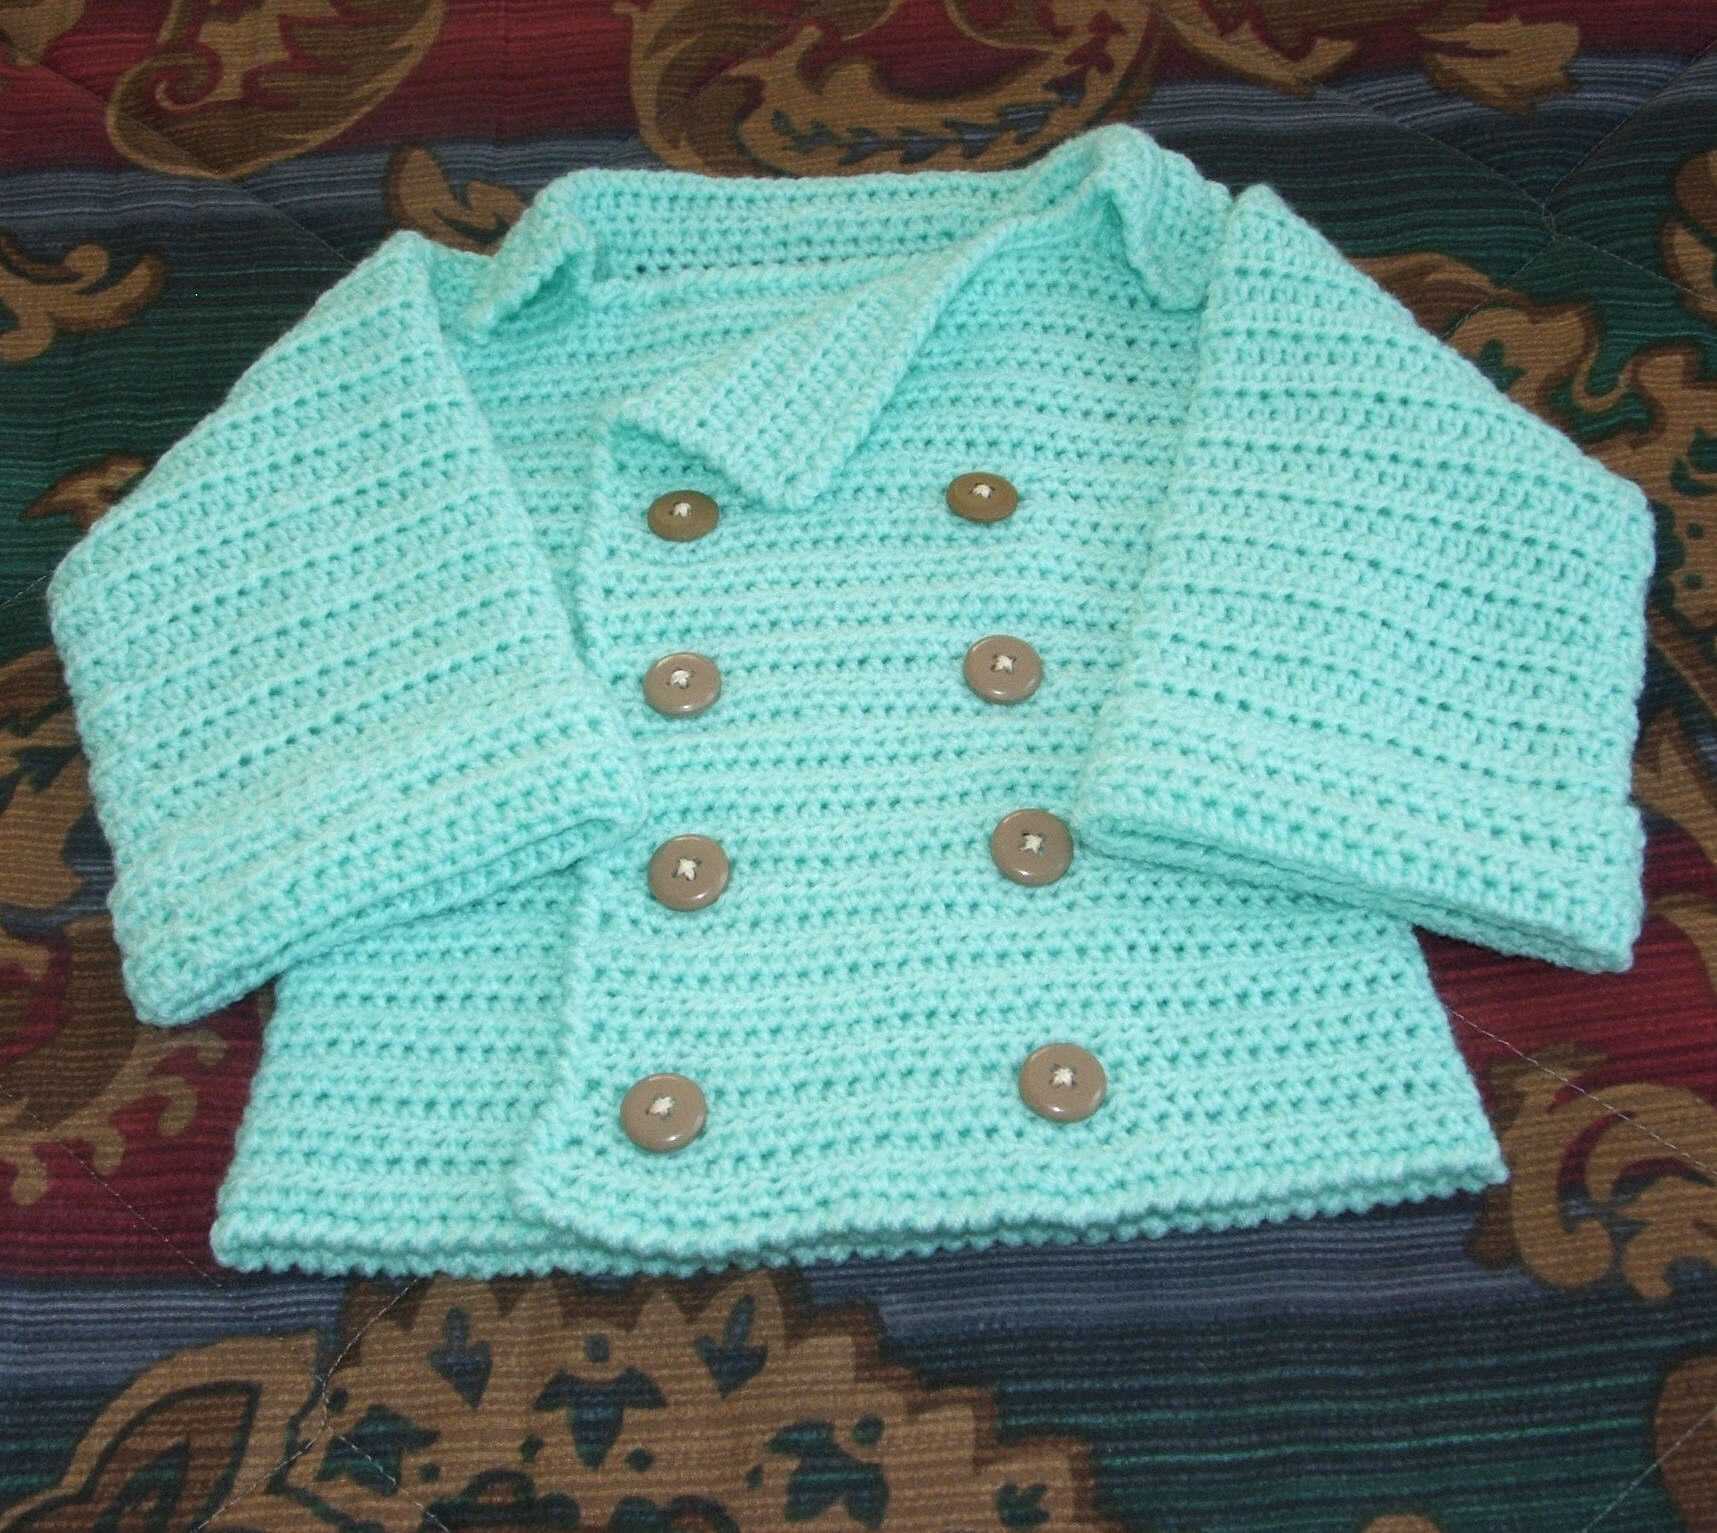 Crochet Baby Boy Outfits, Crochet Baby Girl Outfits items in